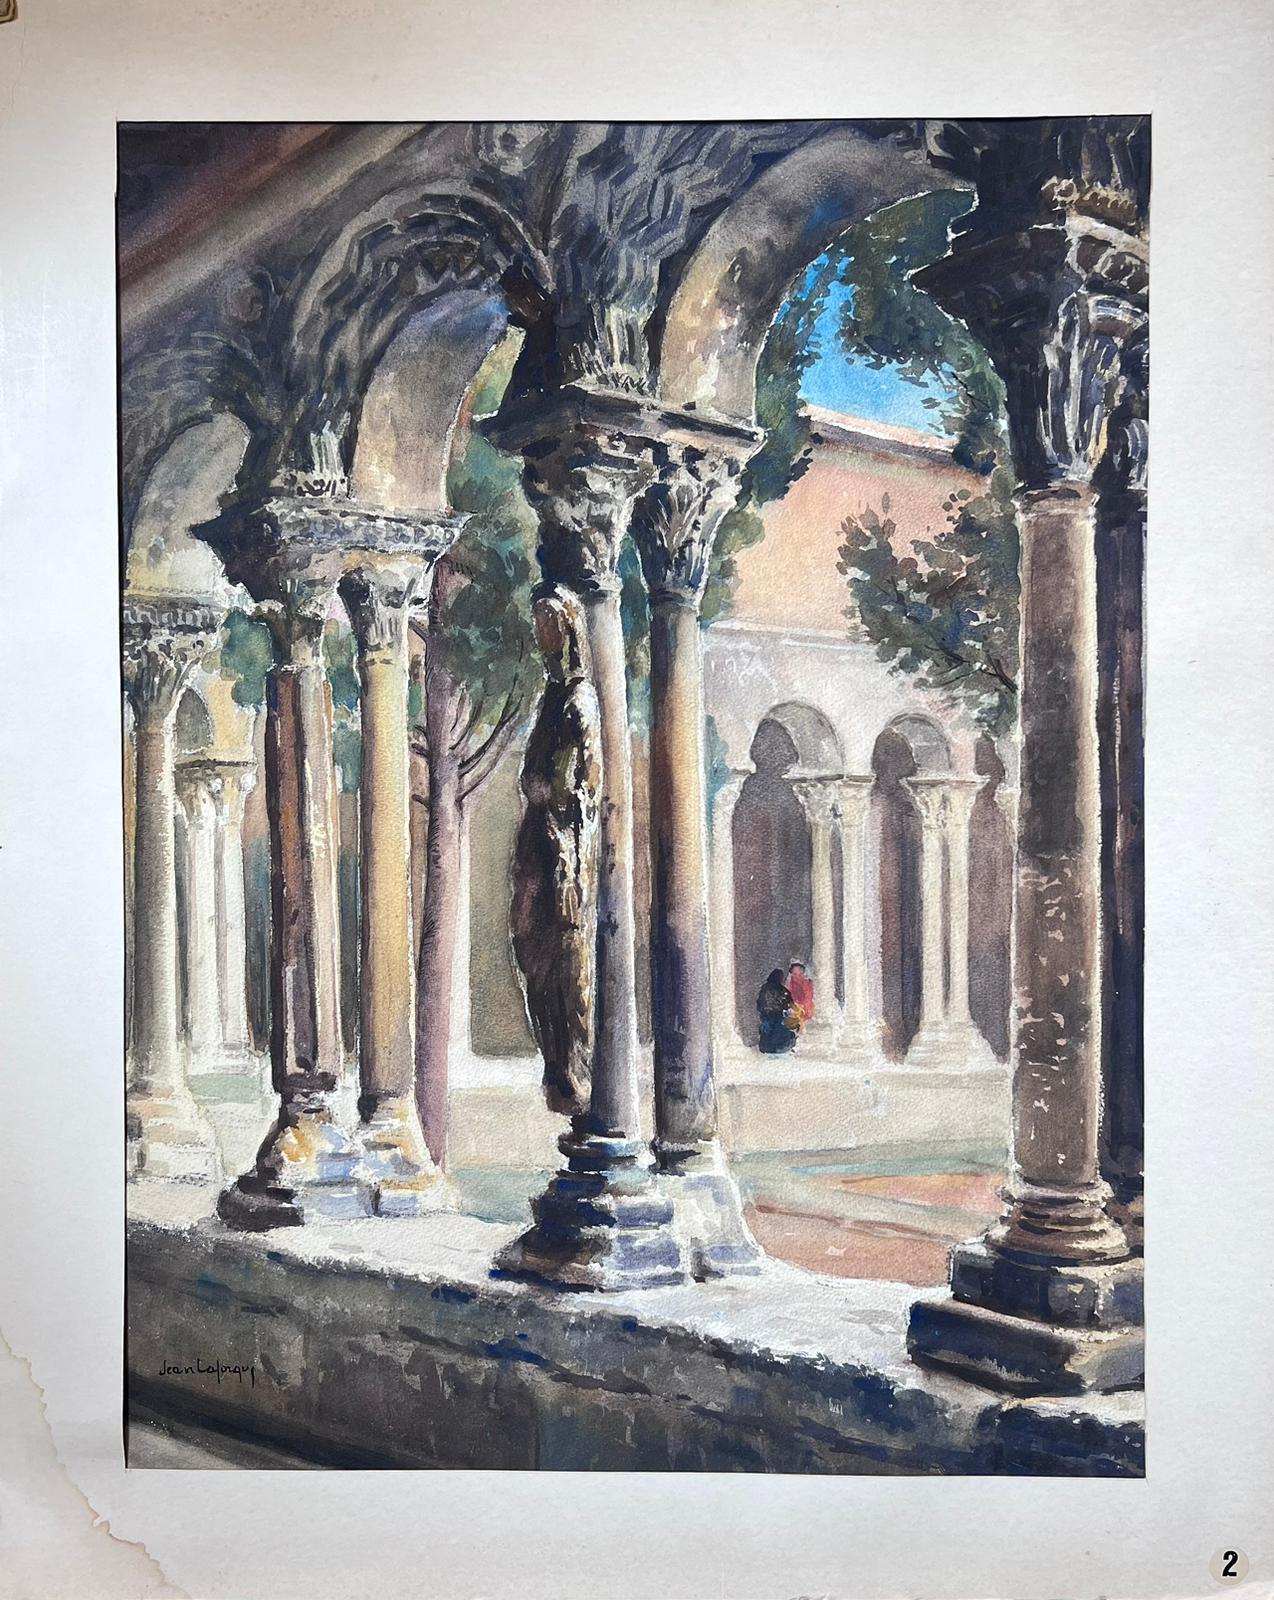 Jean La Forgue (French 1901-1975) signed watercolour on paper, mounted in a card frame
card frame: 29 x 23 inches
painting: 24 x 18 inches
provenance: the artists estate, France
condition: very good and sound condition; there are minor age related